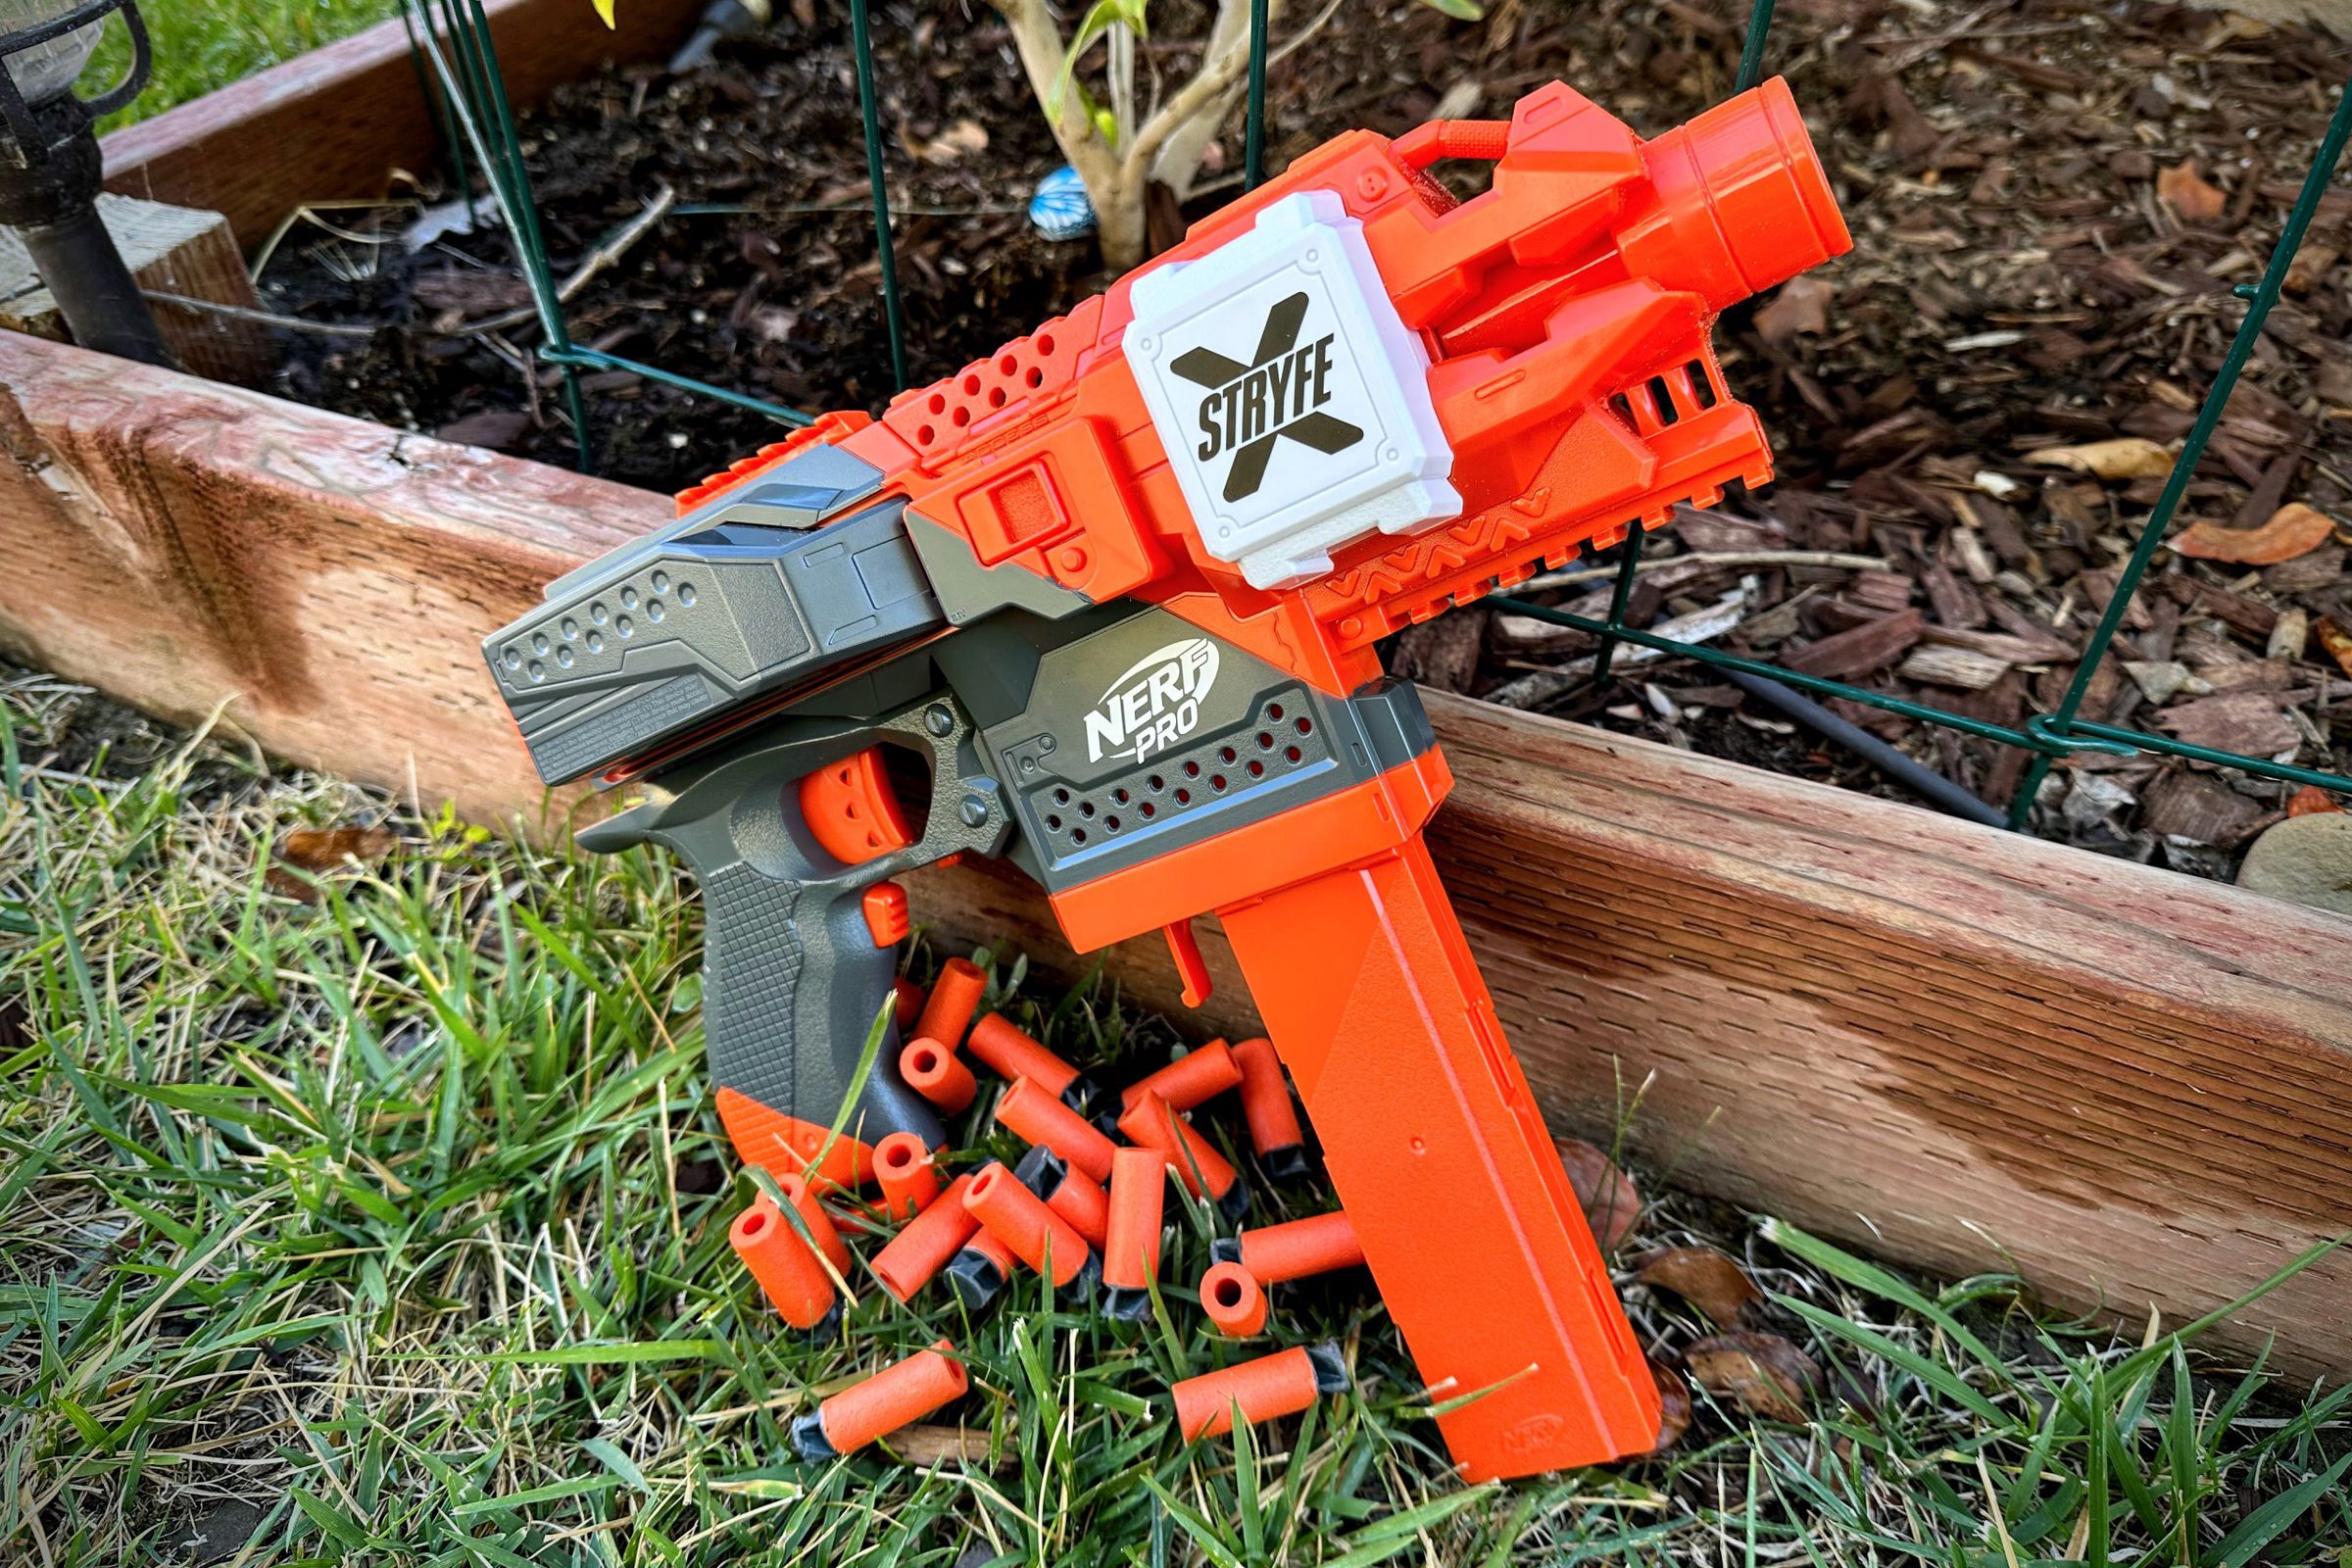 A bright orange SMG-shaped blaster with a long vertical stick magazine.